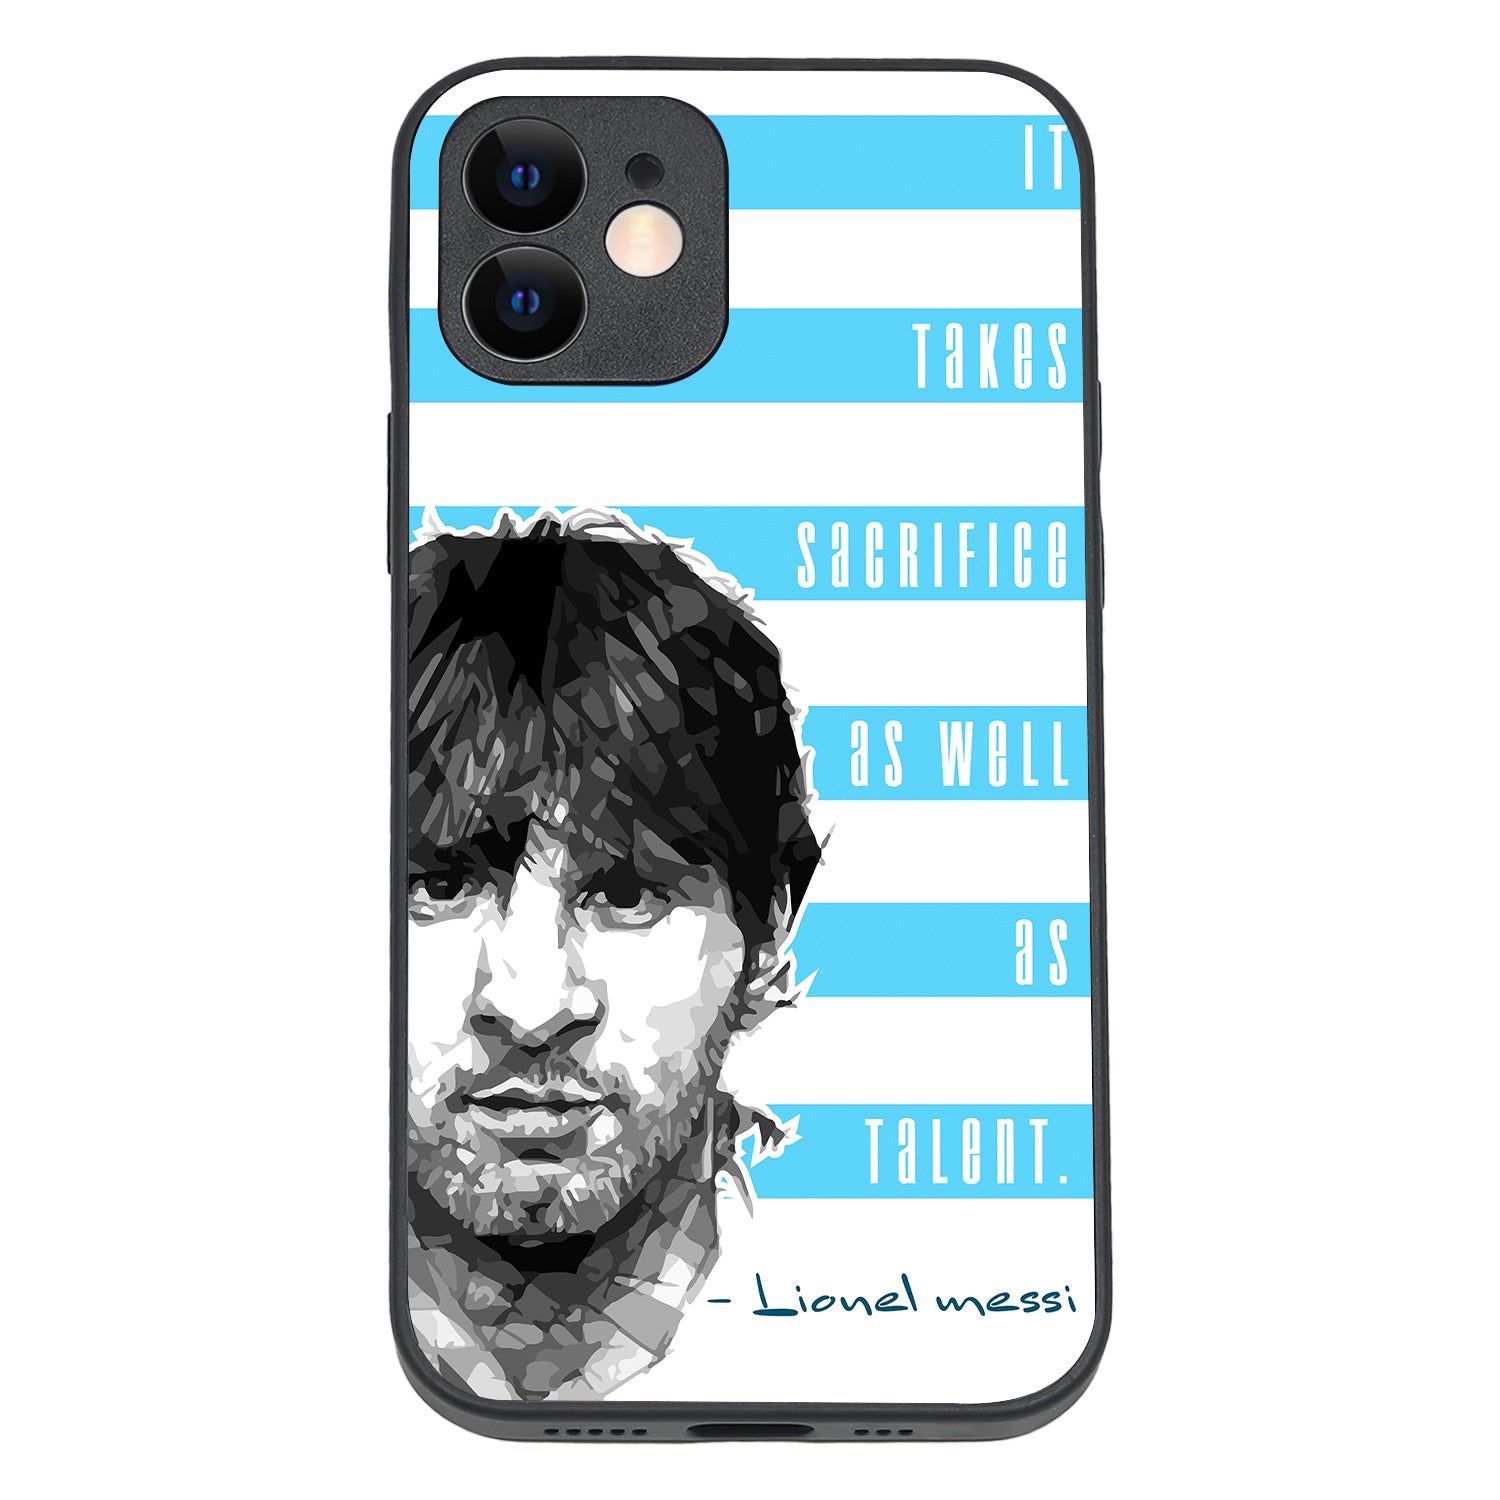 Messi Quote Sports iPhone 12 Case